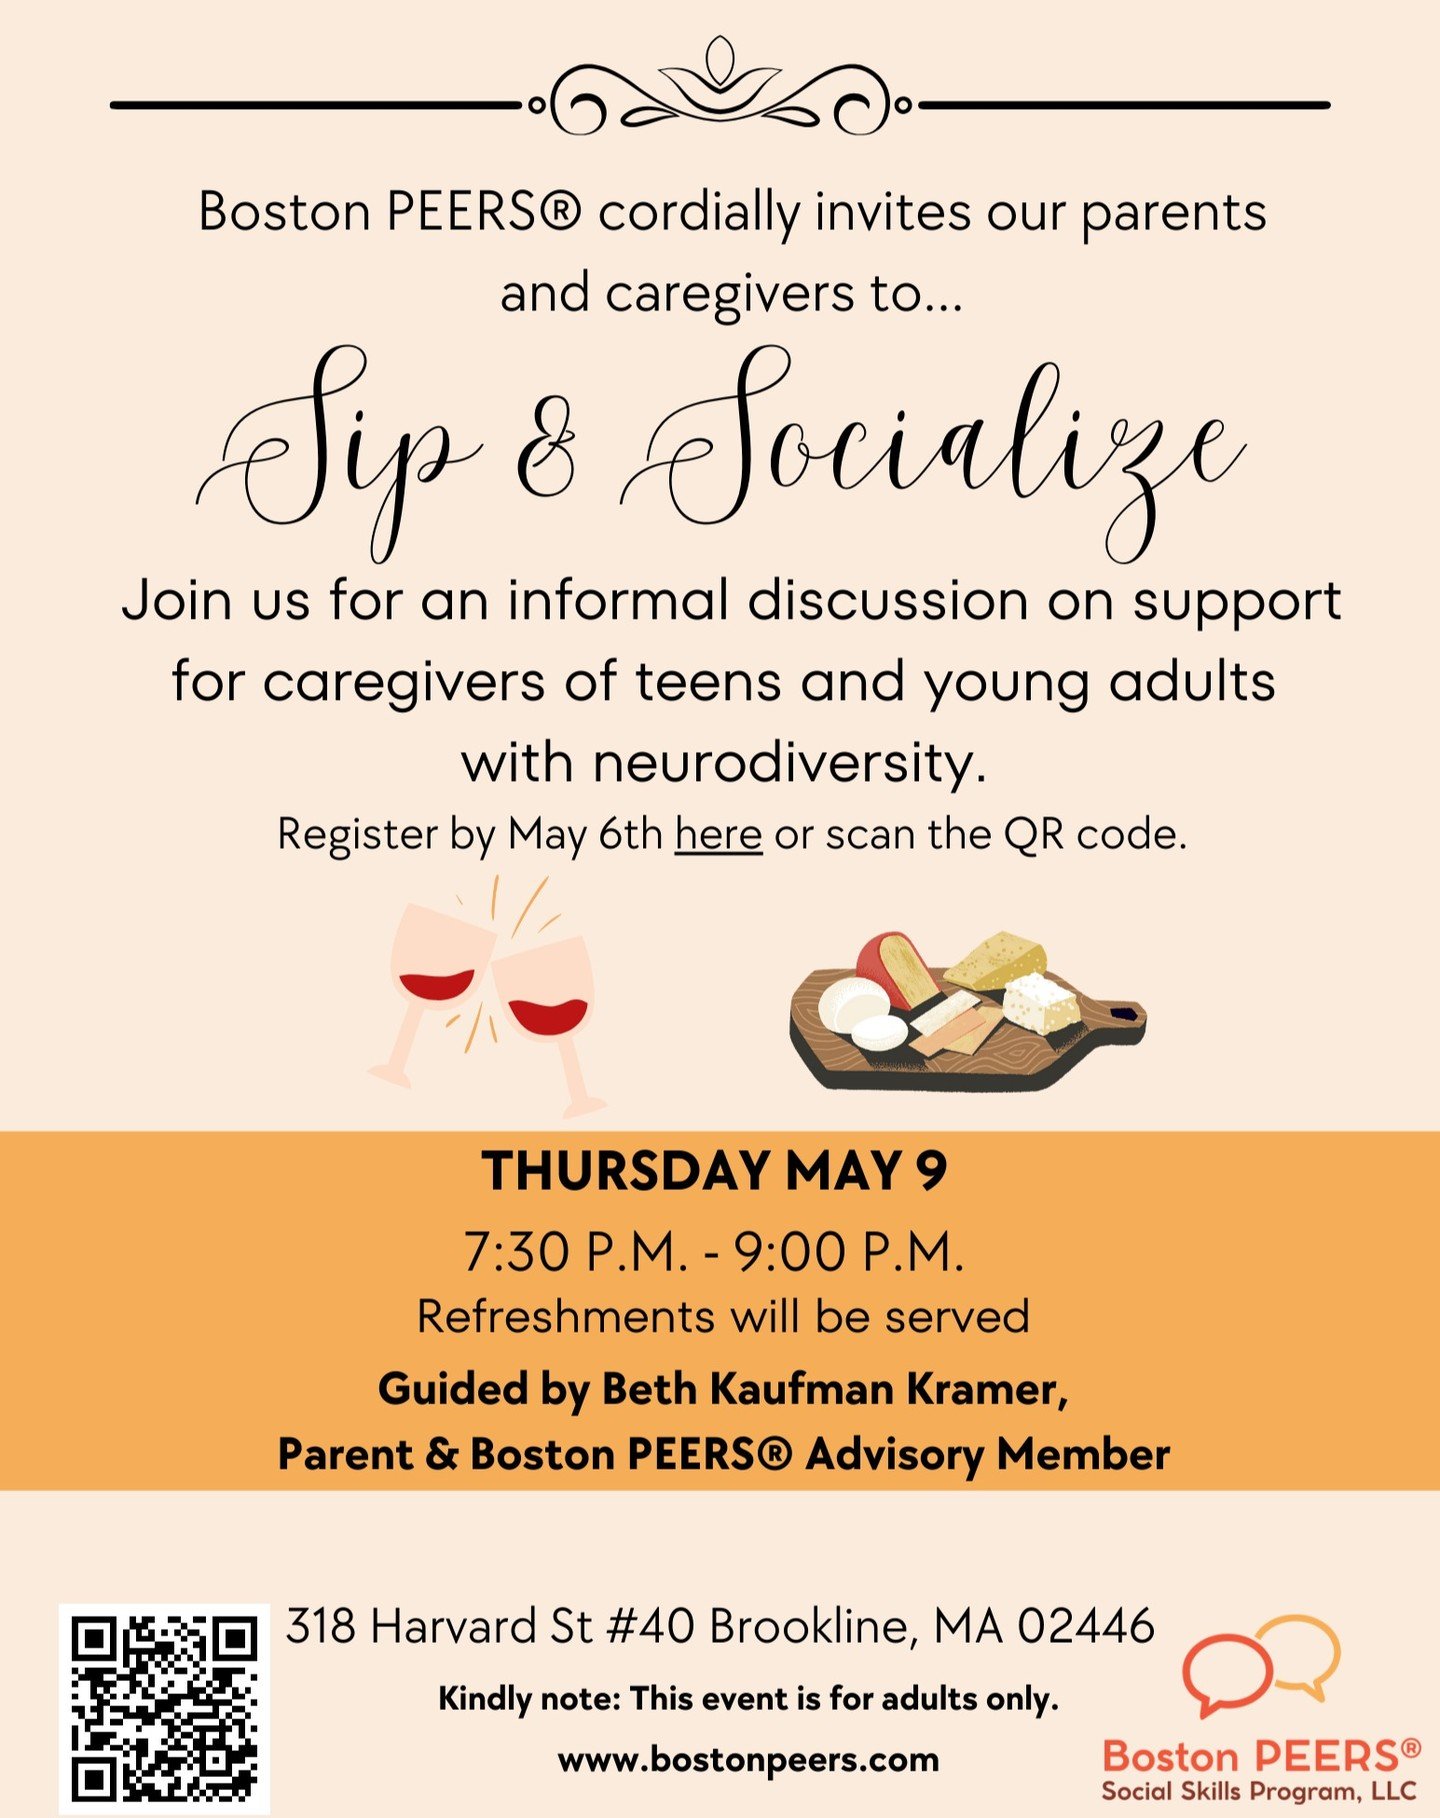 Another PEERS&reg; event is coming up soon! Join us on Thursday May 9th from 7:30PM-9:00PM for an informal discussion on support for caregivers and parents of teens and young adults with neurodiversity &ndash; guided by Boston PEERS&reg; Advisory Boa